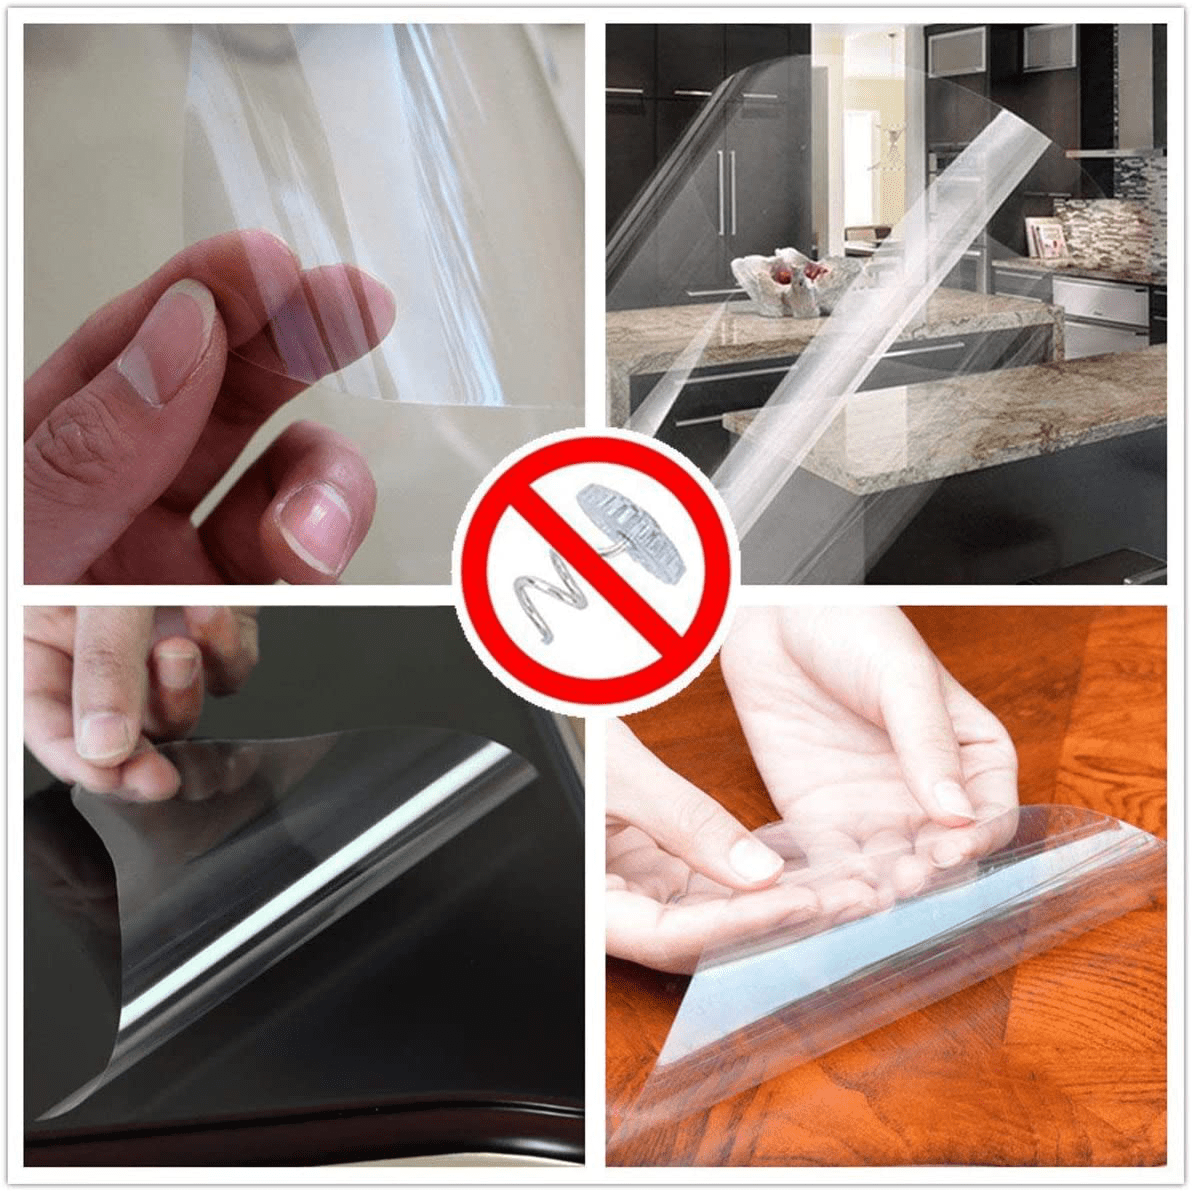 10 Pcs Furniture Protectors from Cats, Clear Self-Adhesive Cat Scratch Deterrent, Couch Protector 4 Pack X-Large (18"L 12"W) + 4 Pack Large (18"L 9"W) + 2 Pack (18"L 6"W) Cat Repellent for Furniture,